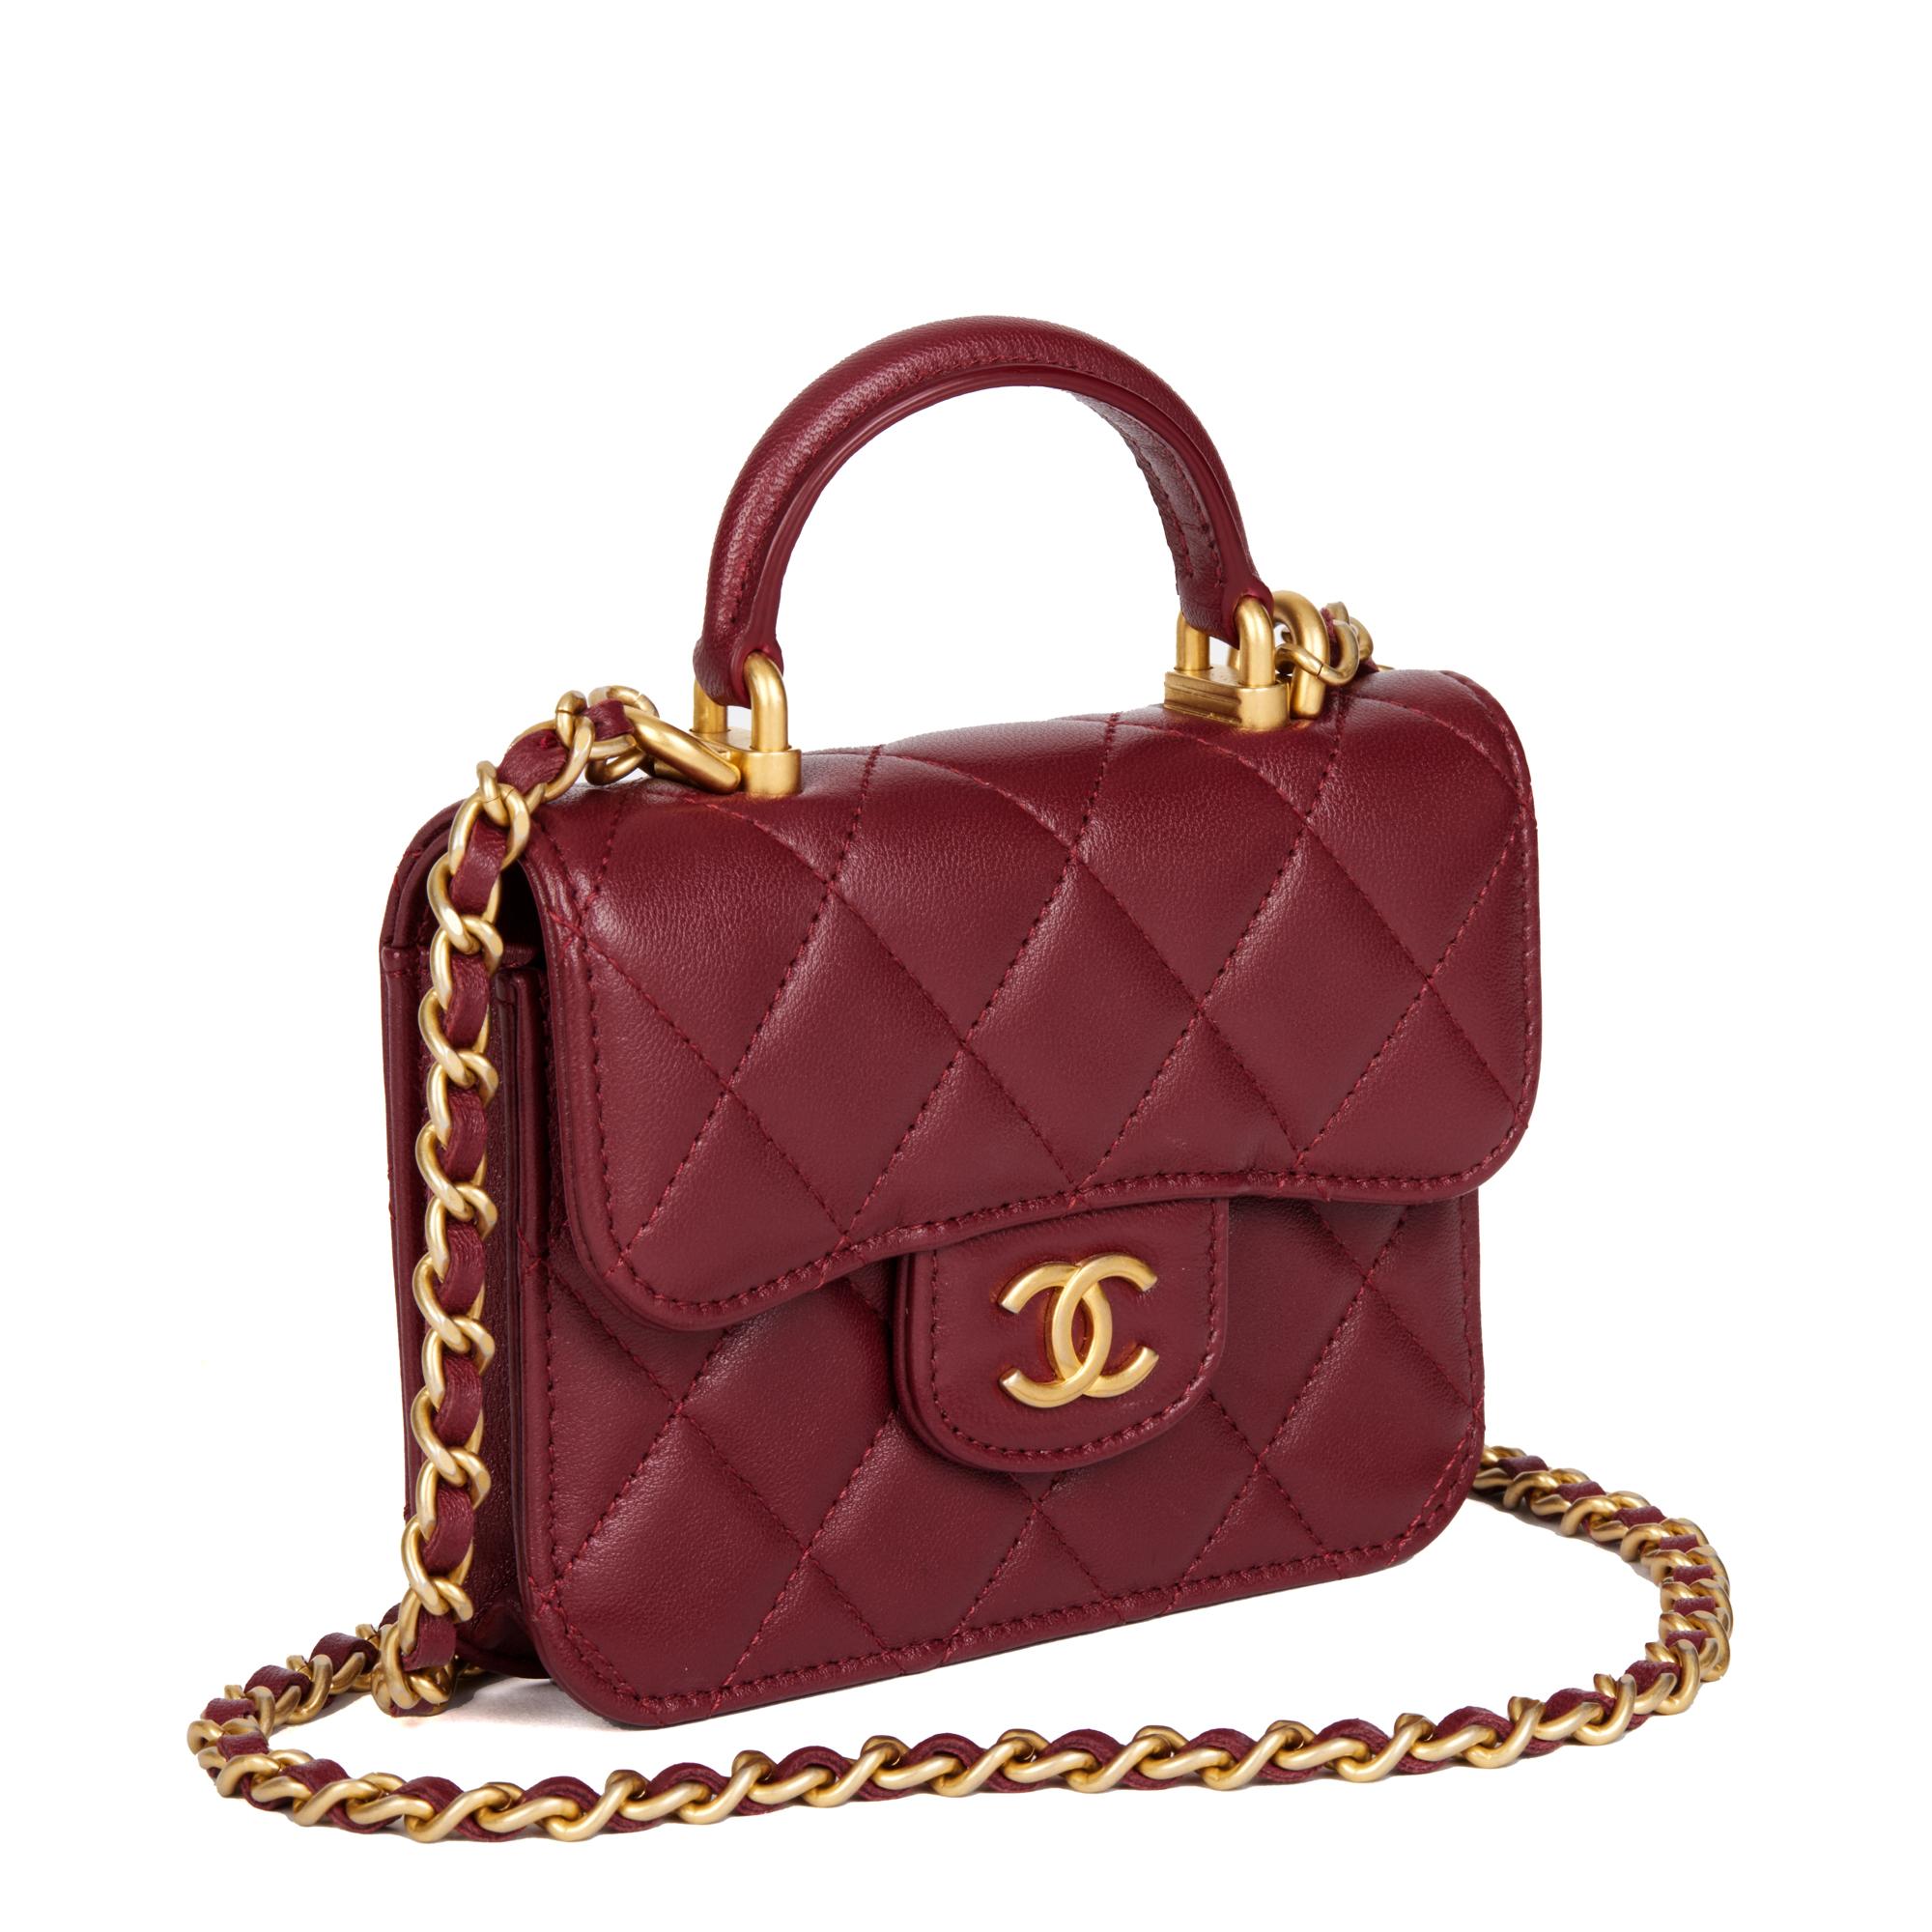 CHANEL
Burgundy Quilted Lambskin Leather Top Handle Mini Card Holder

Xupes Reference: CB588
Serial Number: 31421361
Age (Circa): 2021
Accompanied By: Chanel Dust Bag, Authenticity Card
Authenticity Details: Authenticity Card, Serial Sticker (Made